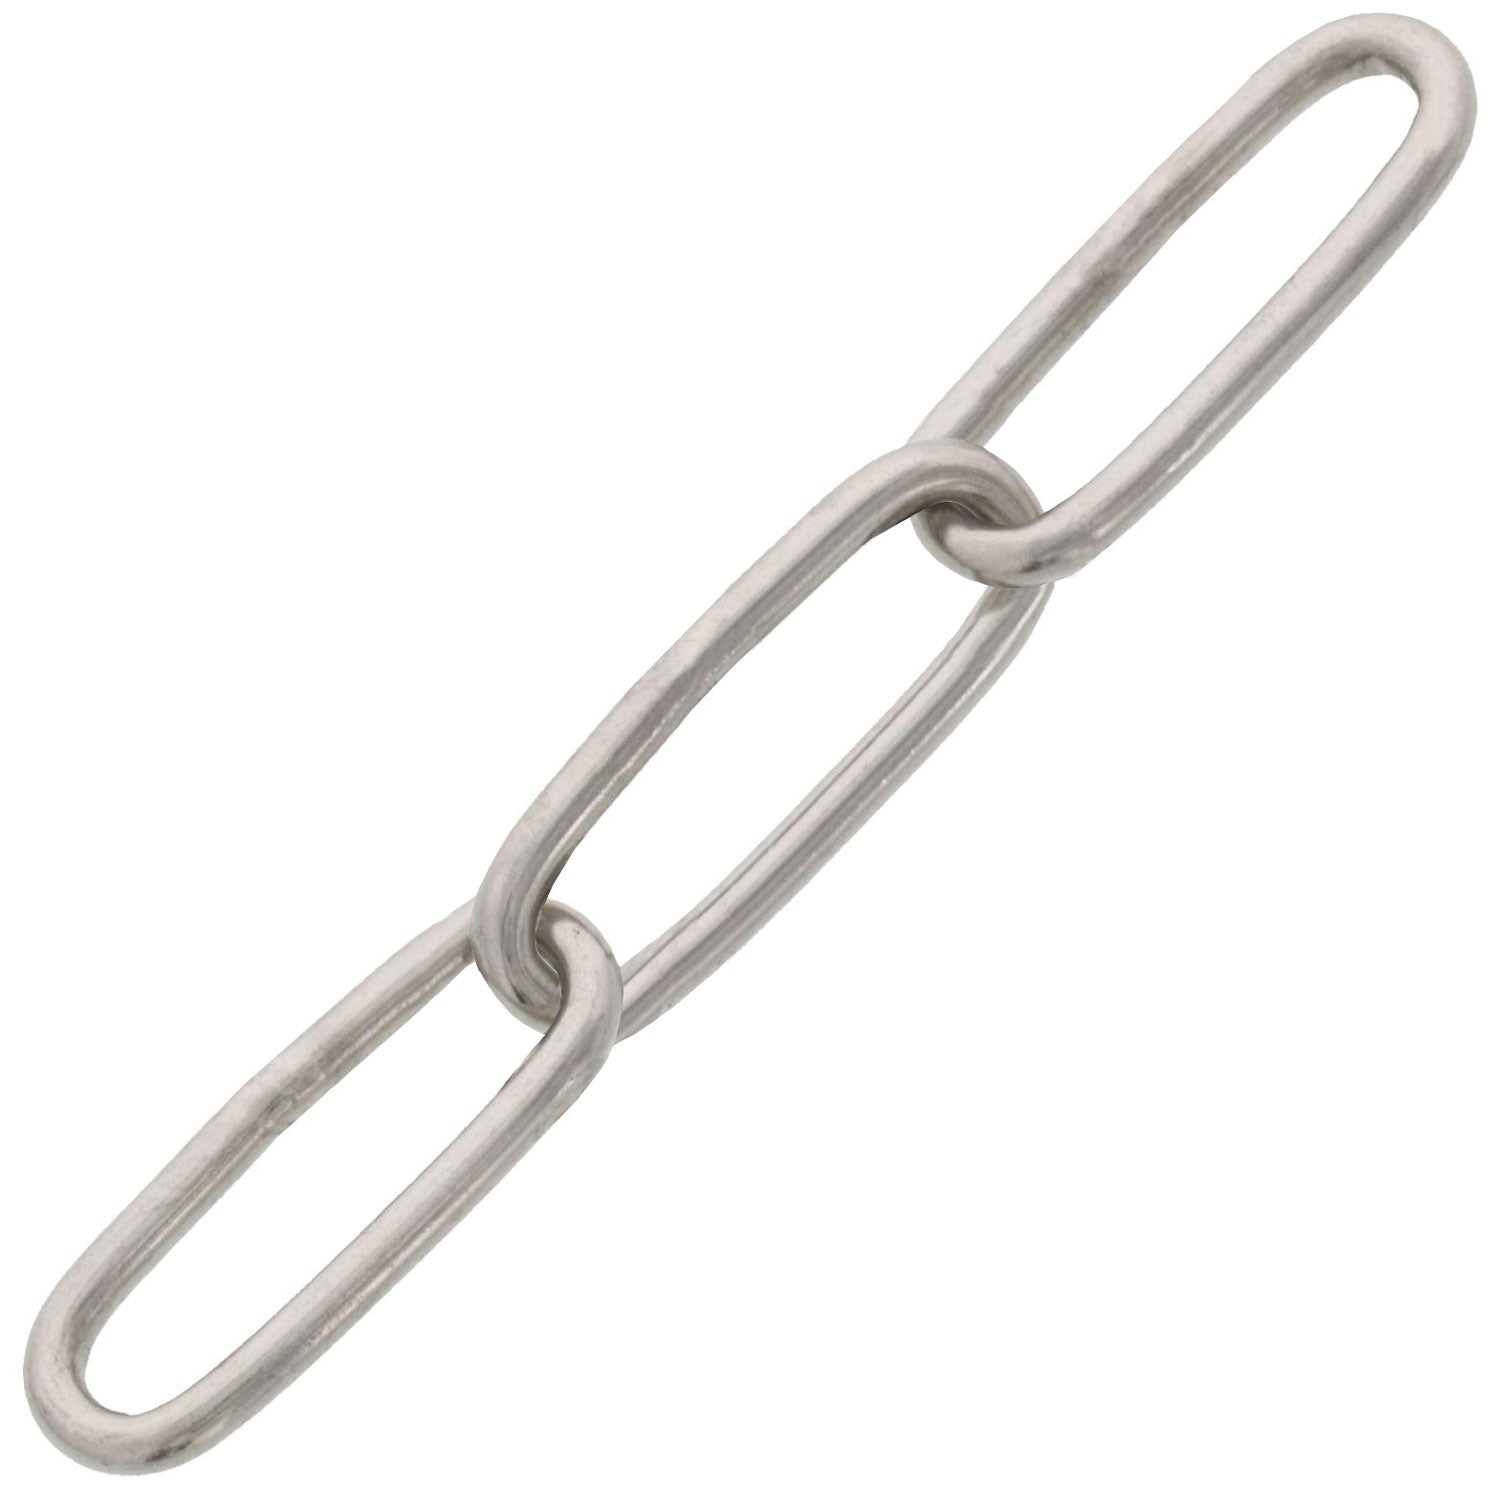 #3, Type 316, Stainless Straight Link Chain (Sold Per Foot)